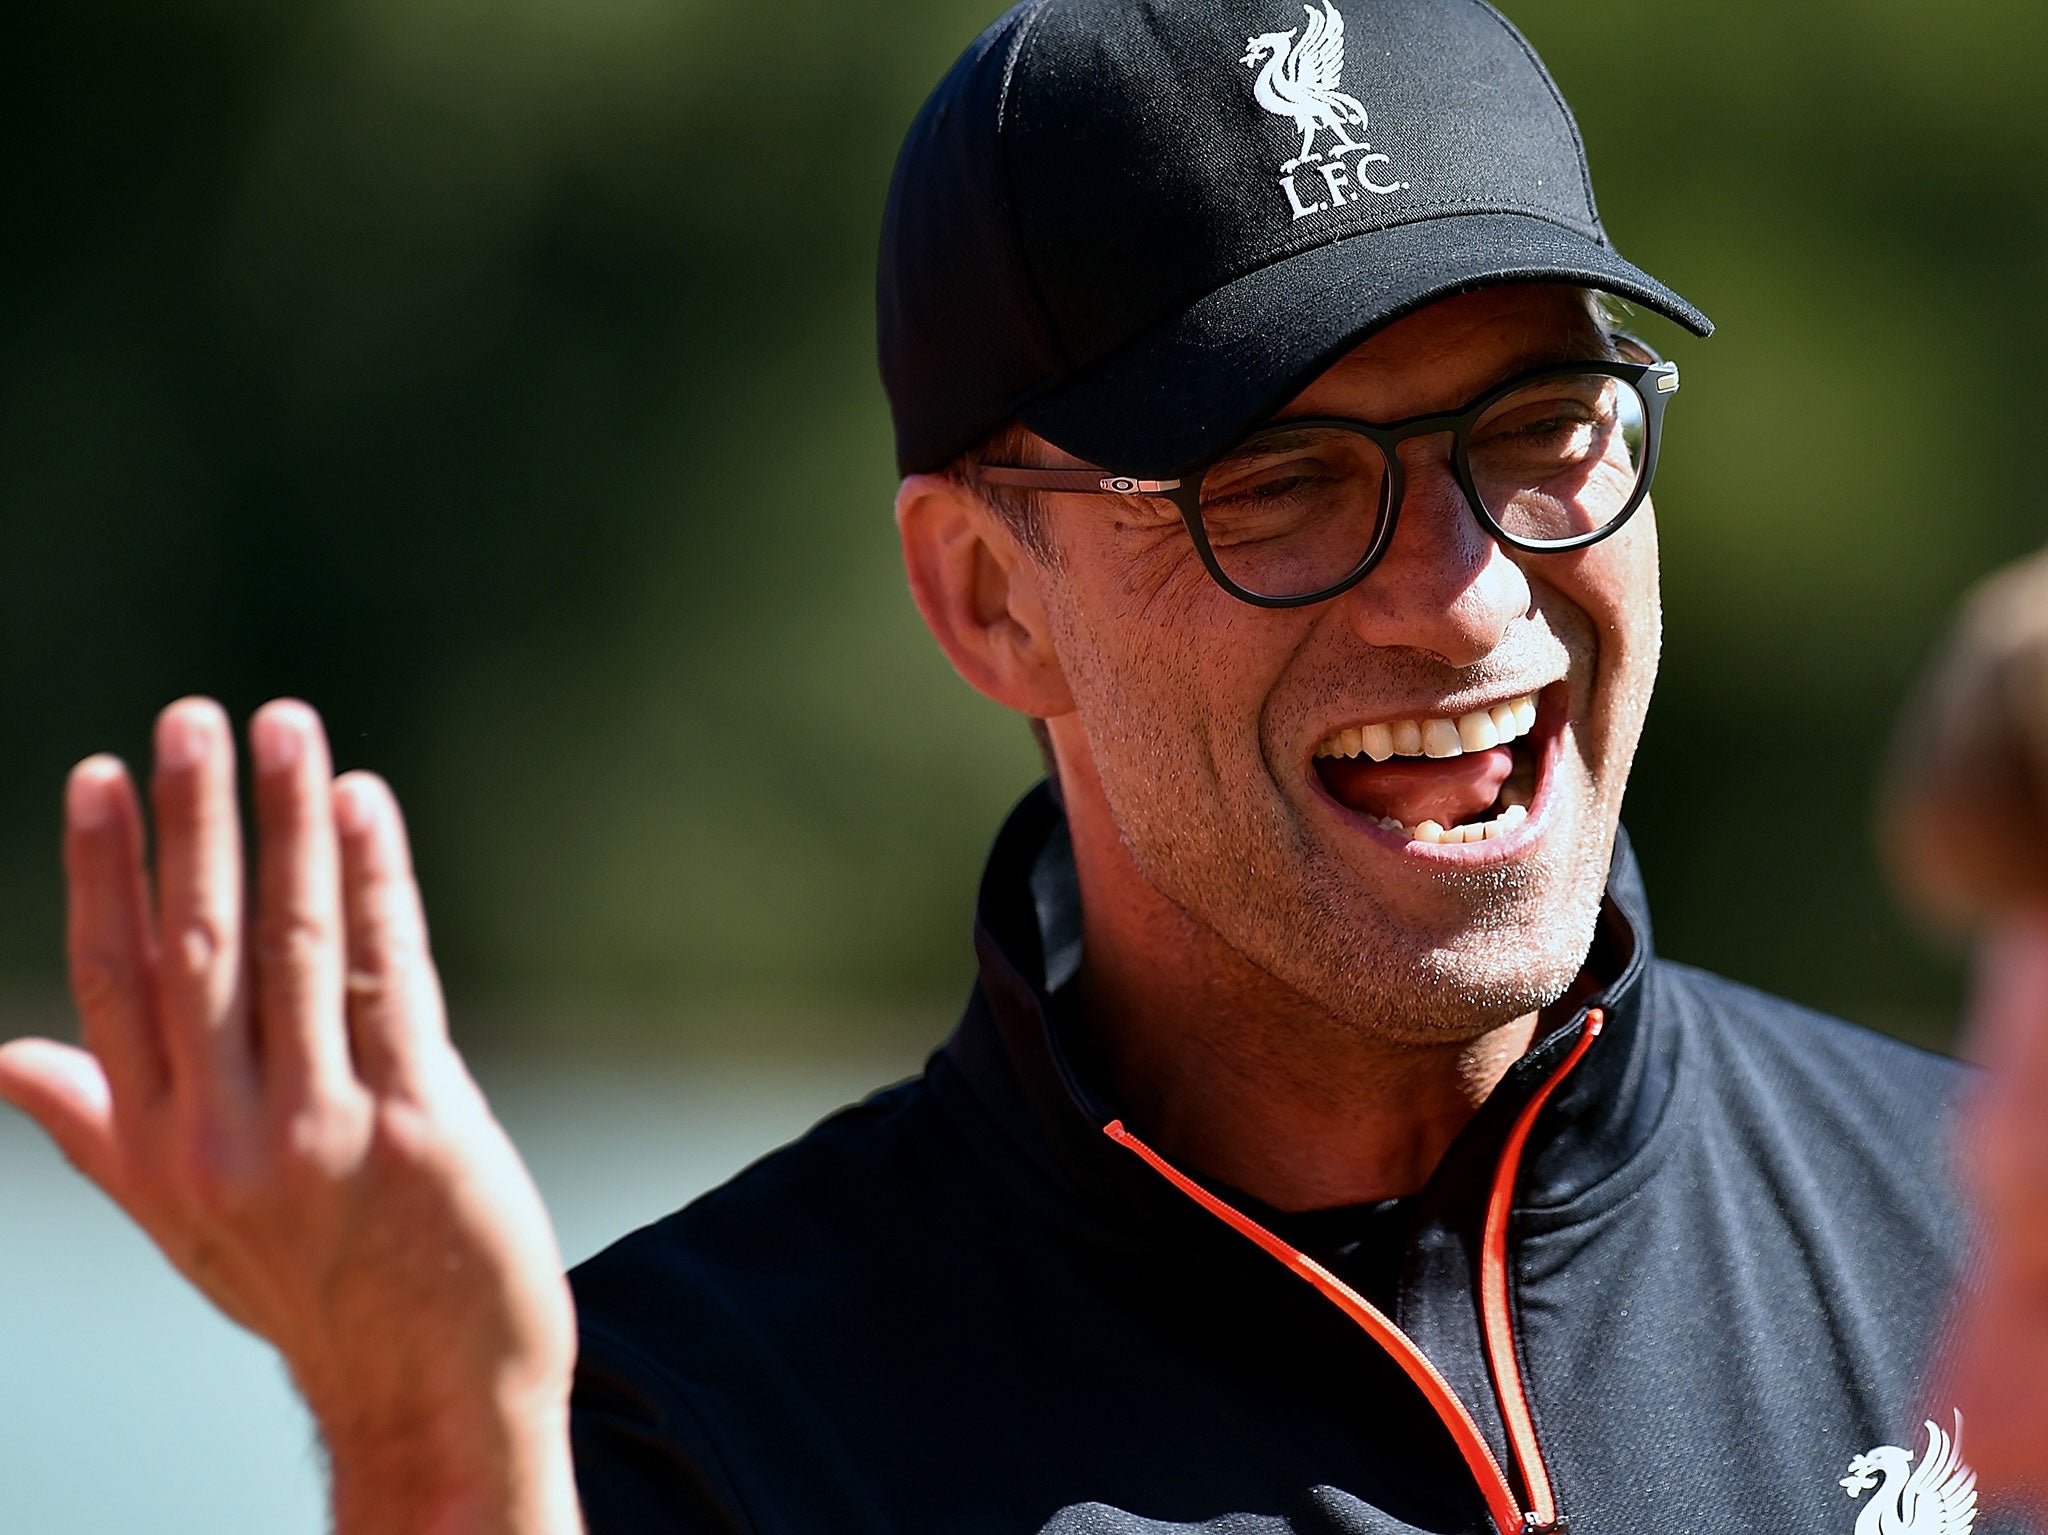 Jurgen Klopp's Liverpool look the best equipped for the new season